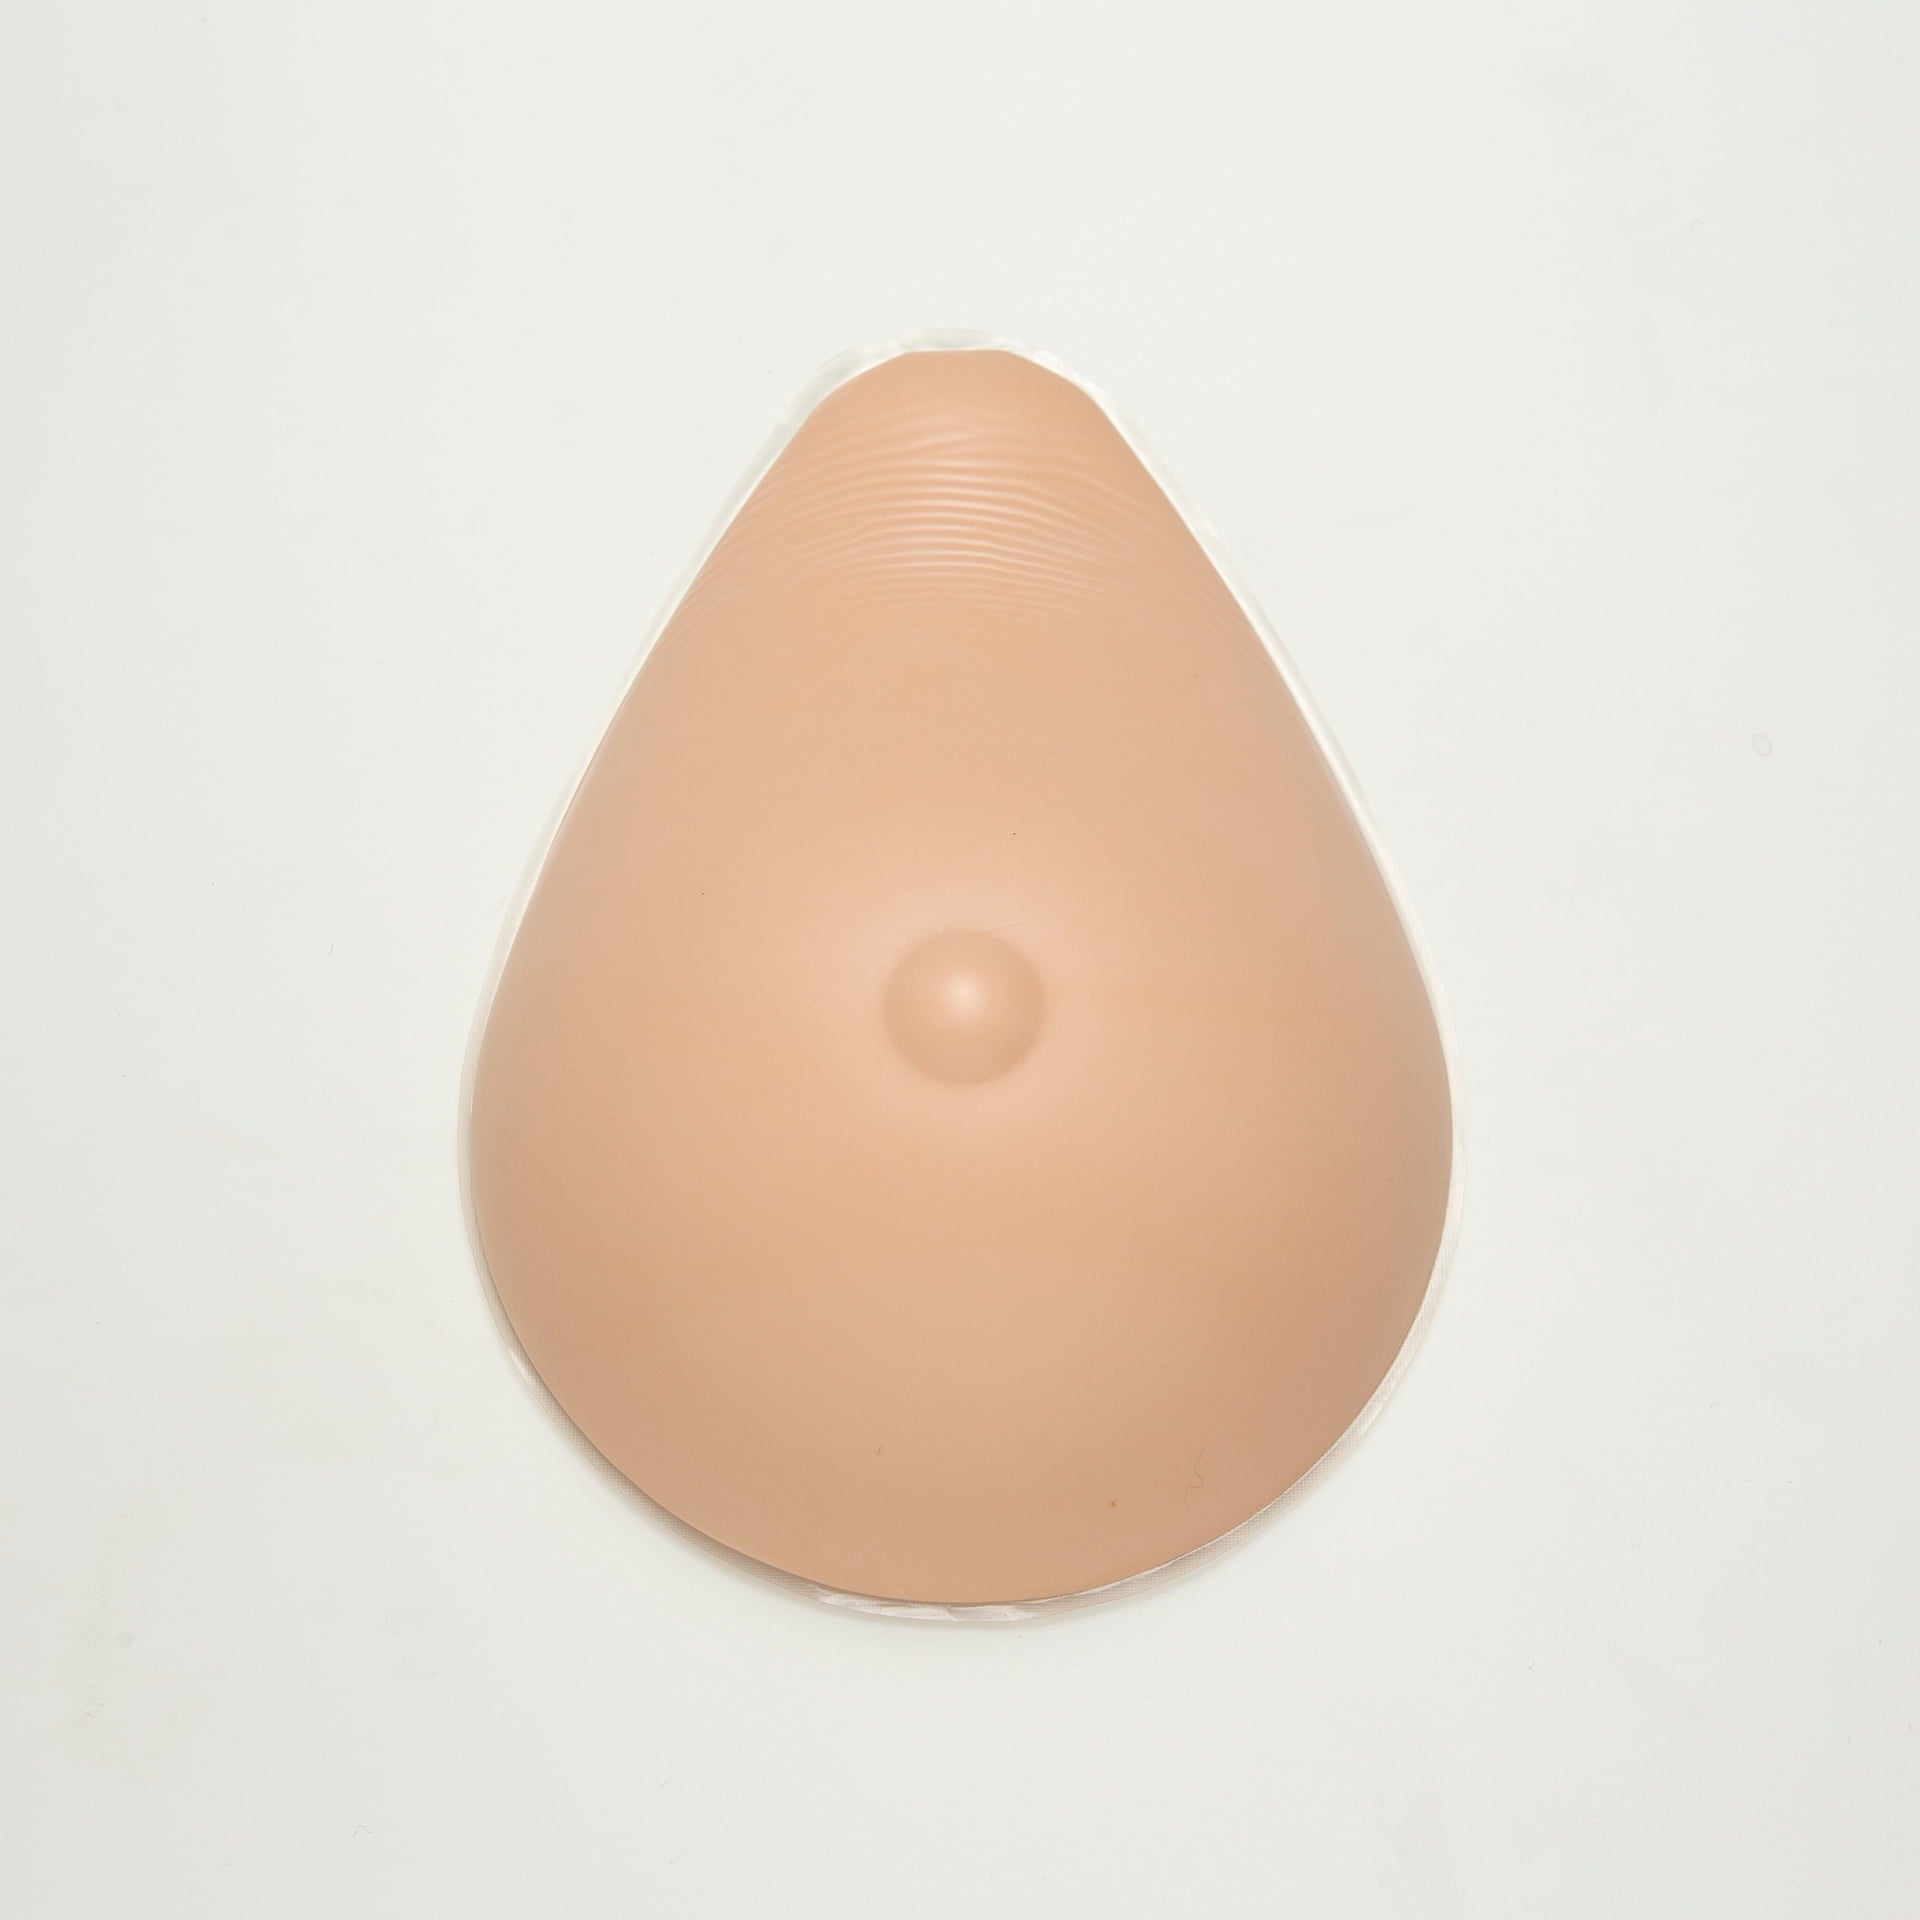 Silicon pad breast type 160g 1 piece